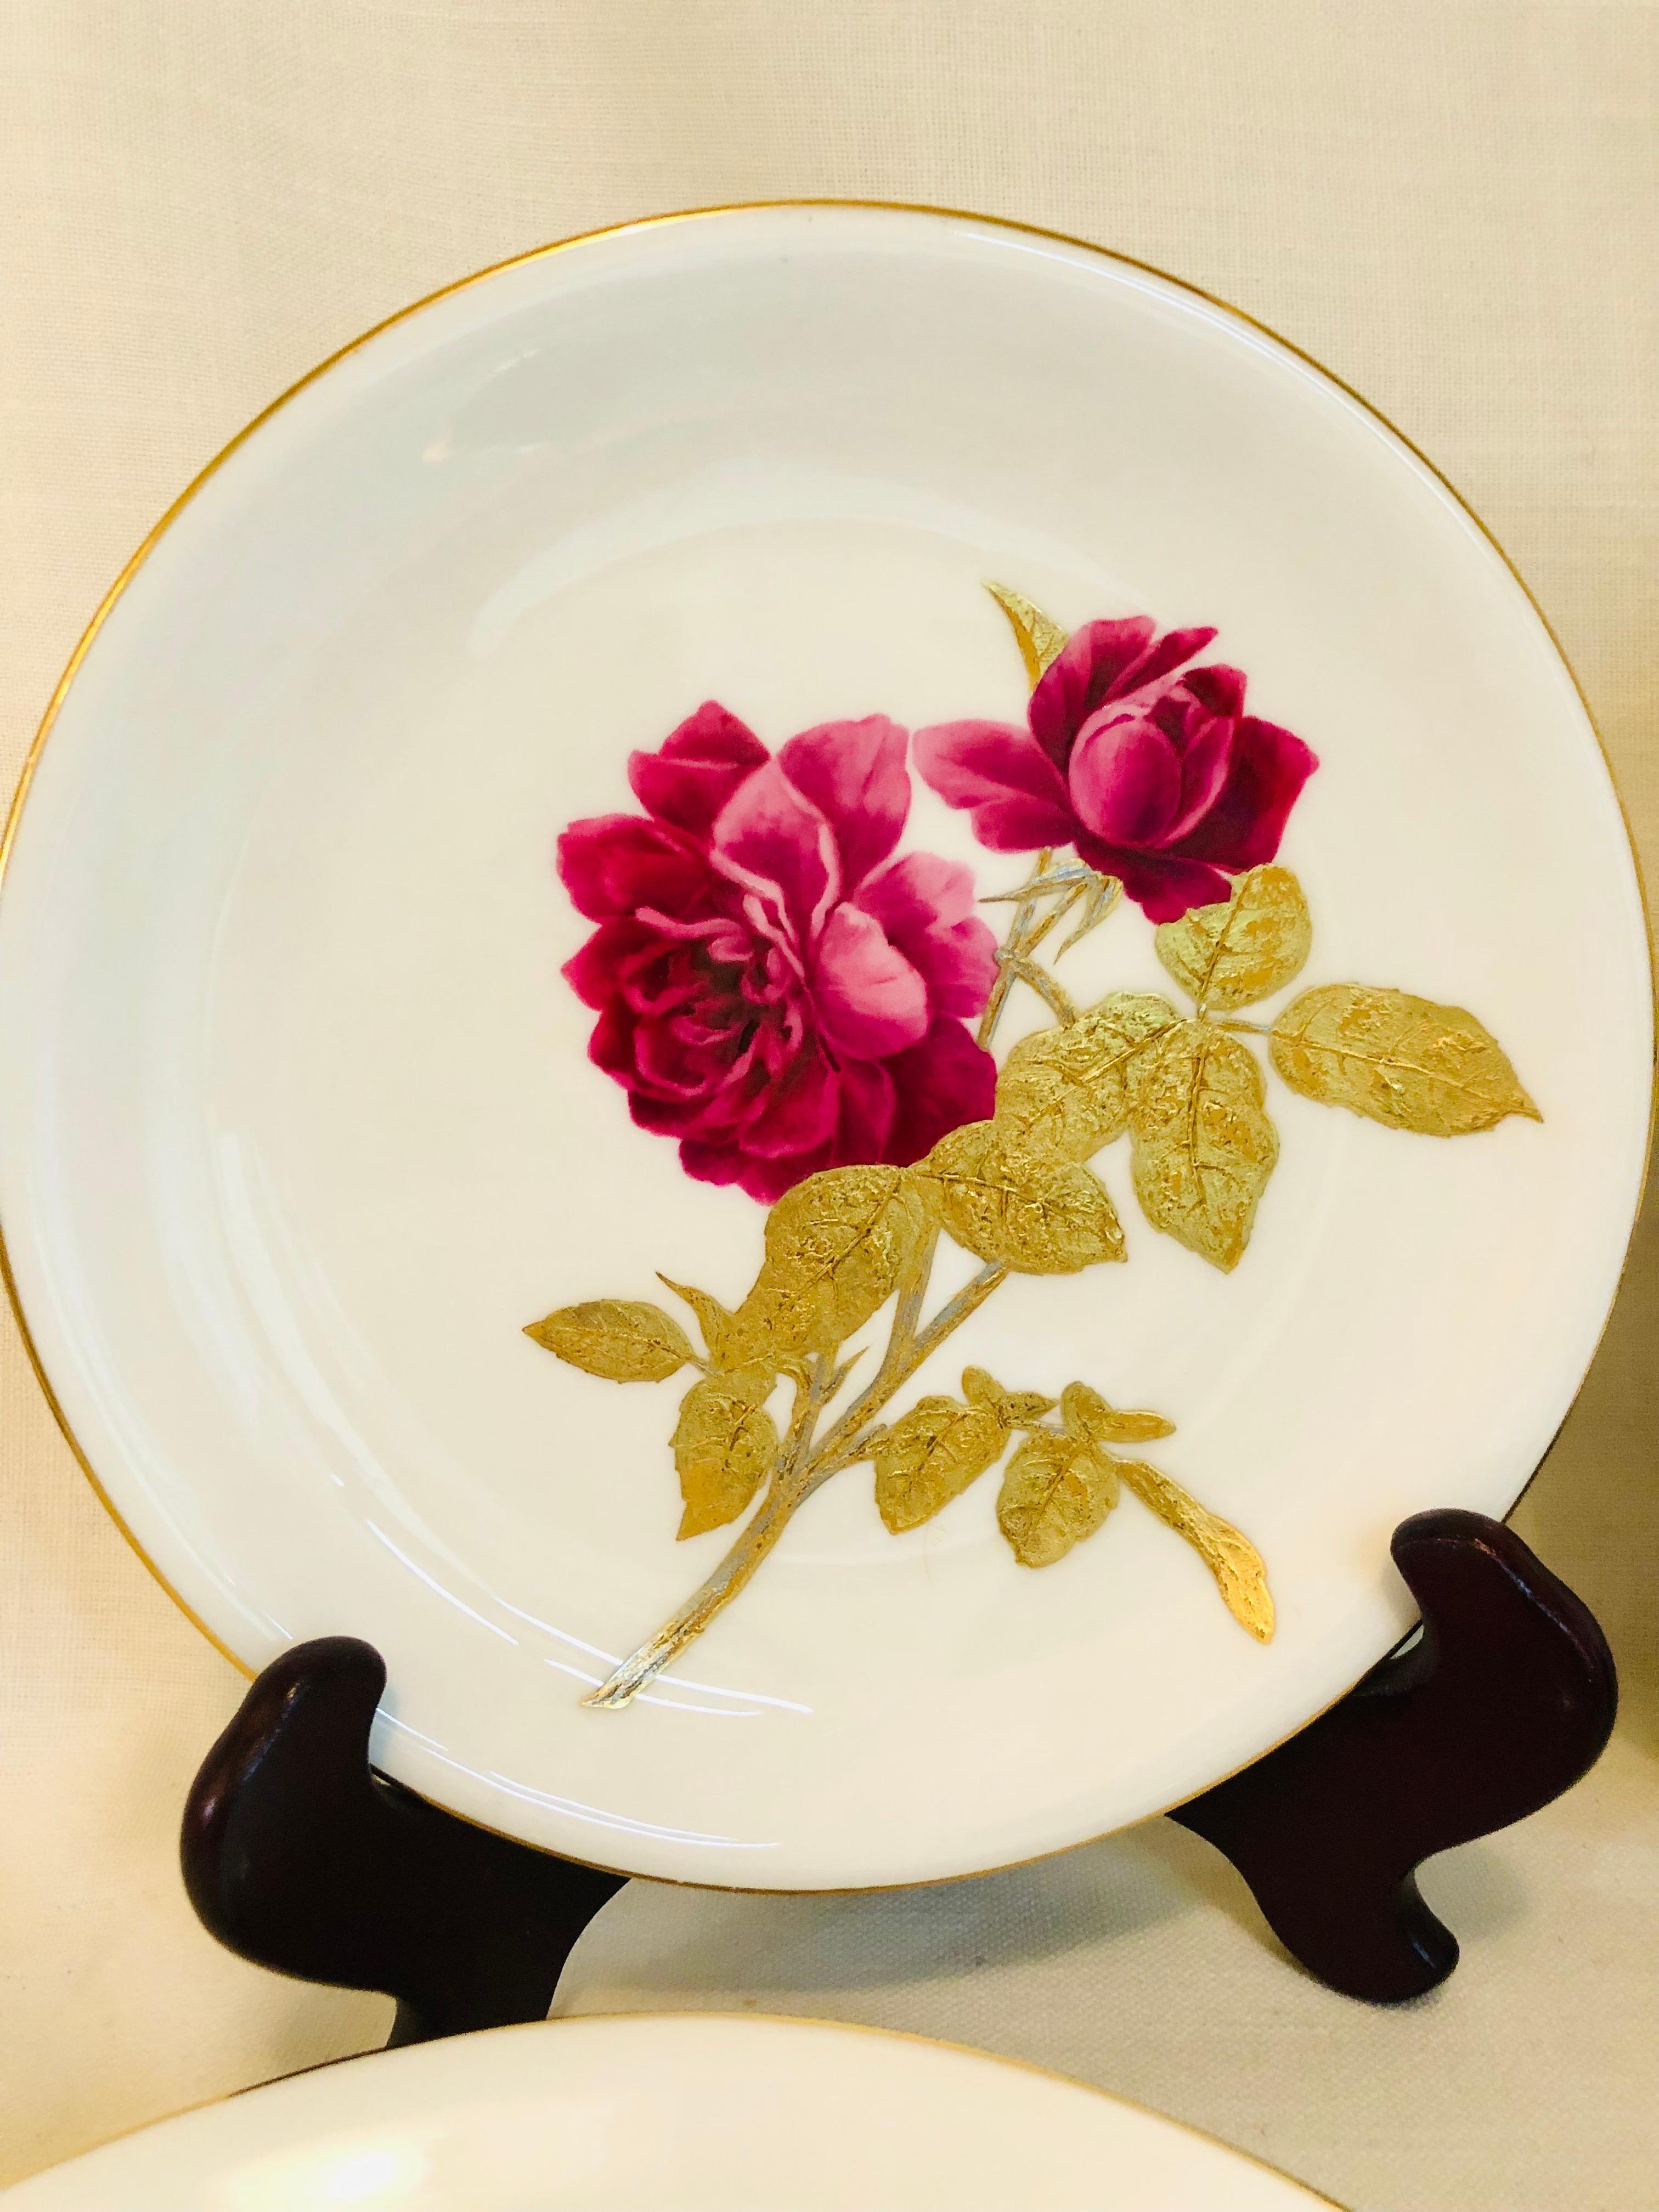 Rococo Minton Plates Each Painted With a Different Rose With Gold and Platinum Accents